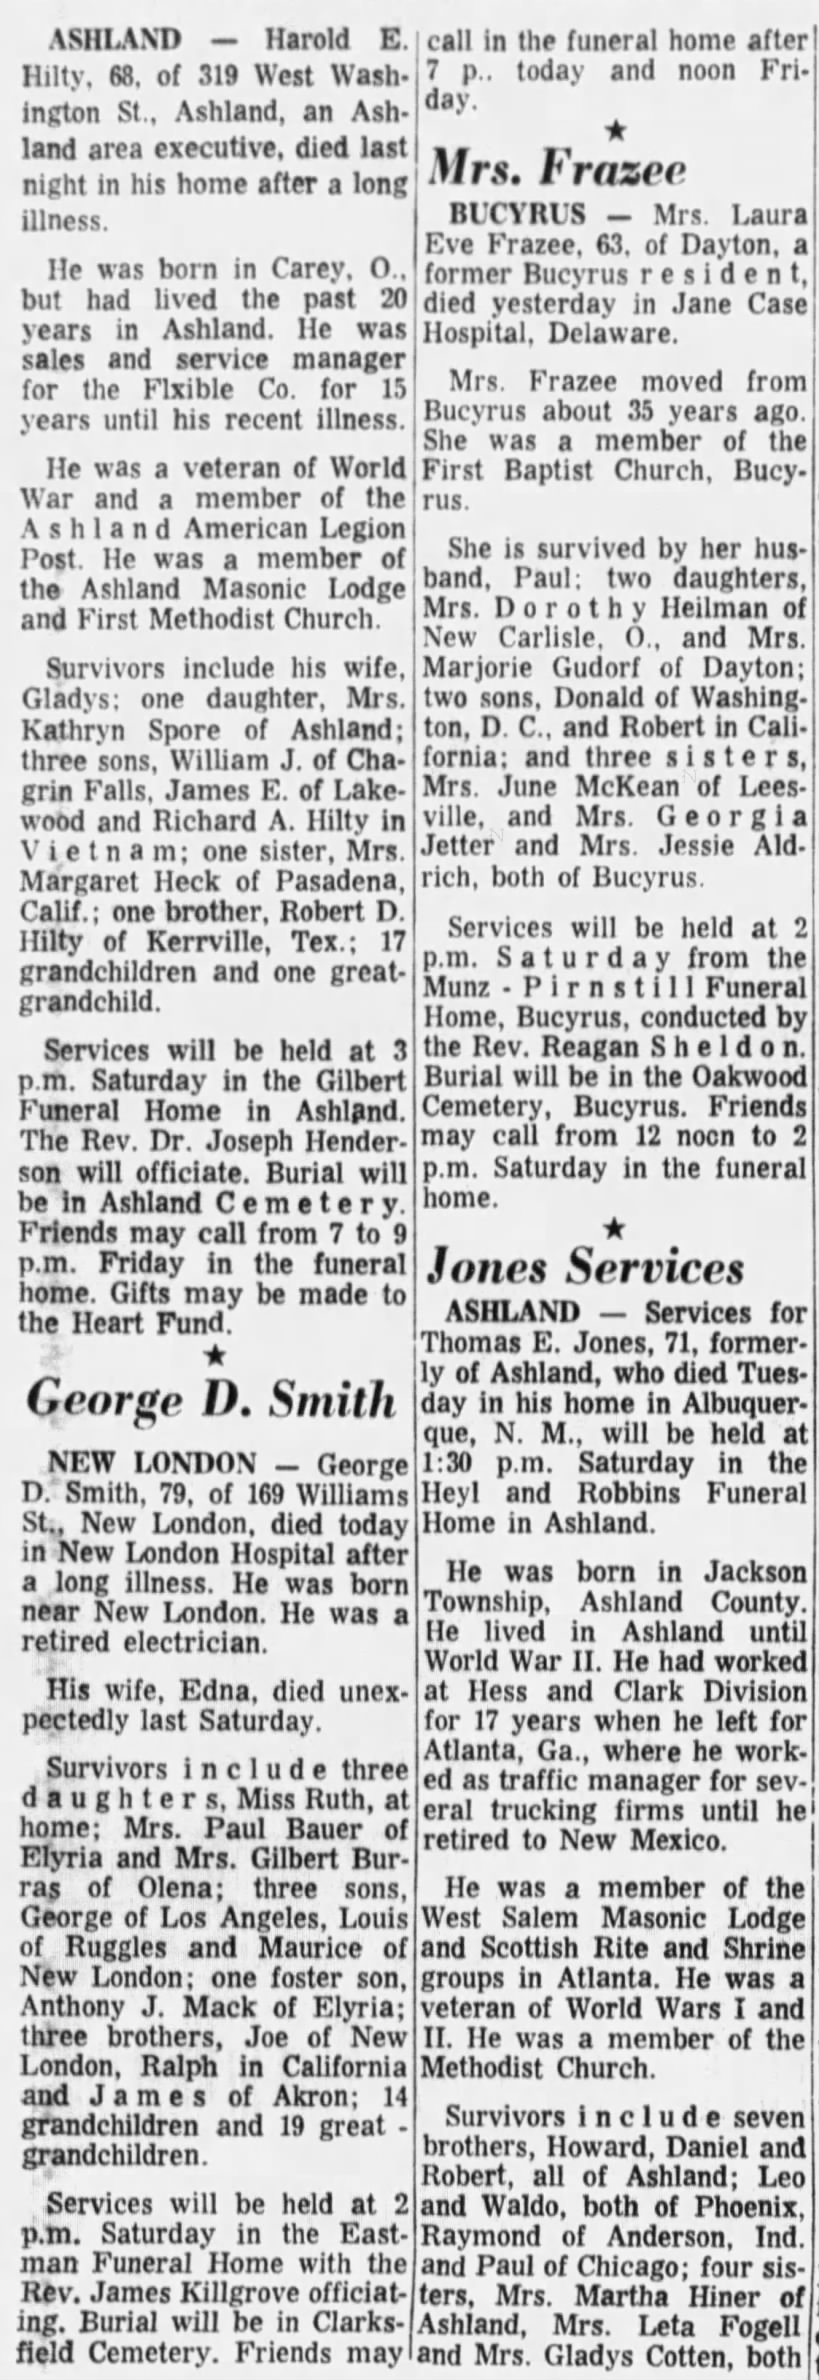 News-Journal (Mansfield,OH) 19 Oct 1967, Thu. p32
George D. Smith obit